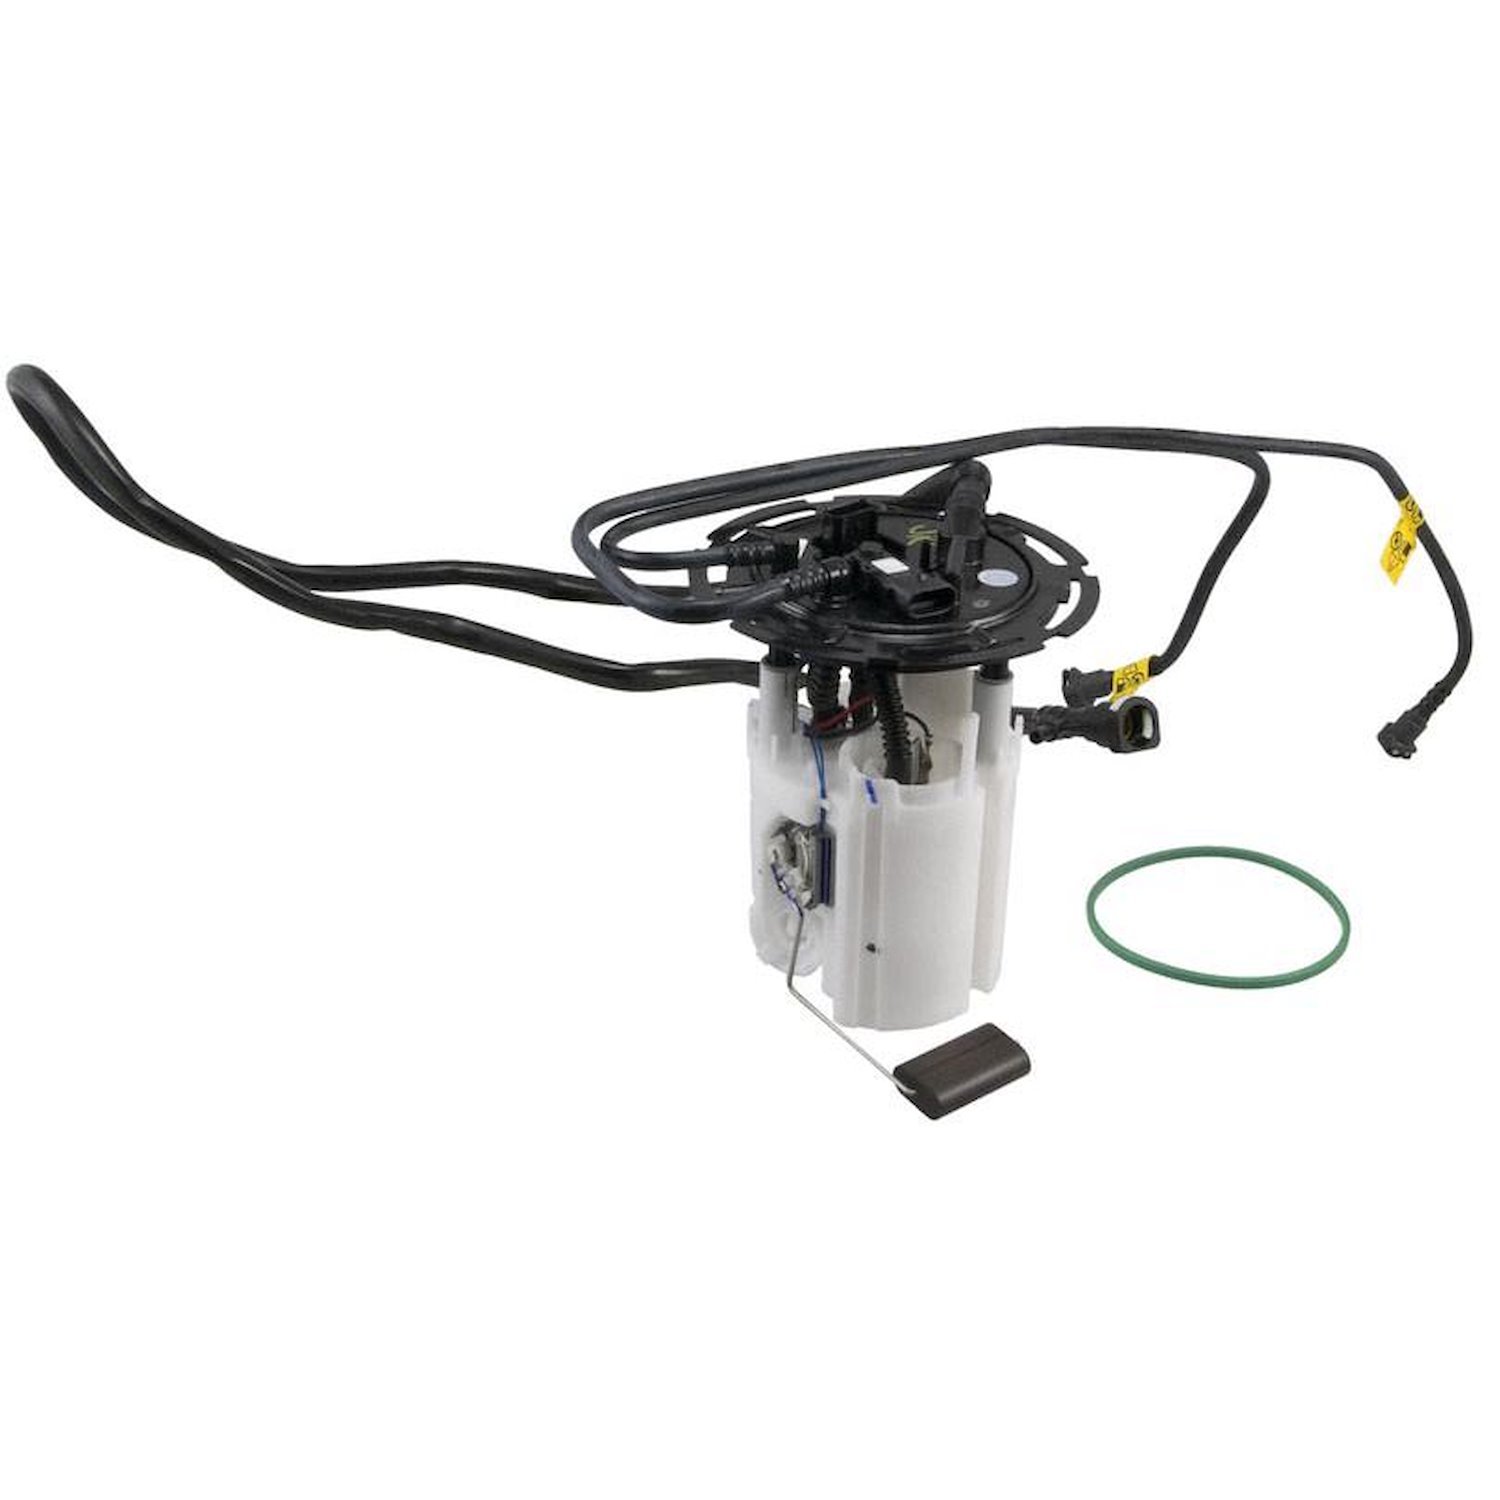 OE Replacement Electric Fuel Pump Module Assembly for 2003-2011 Saab 9-3